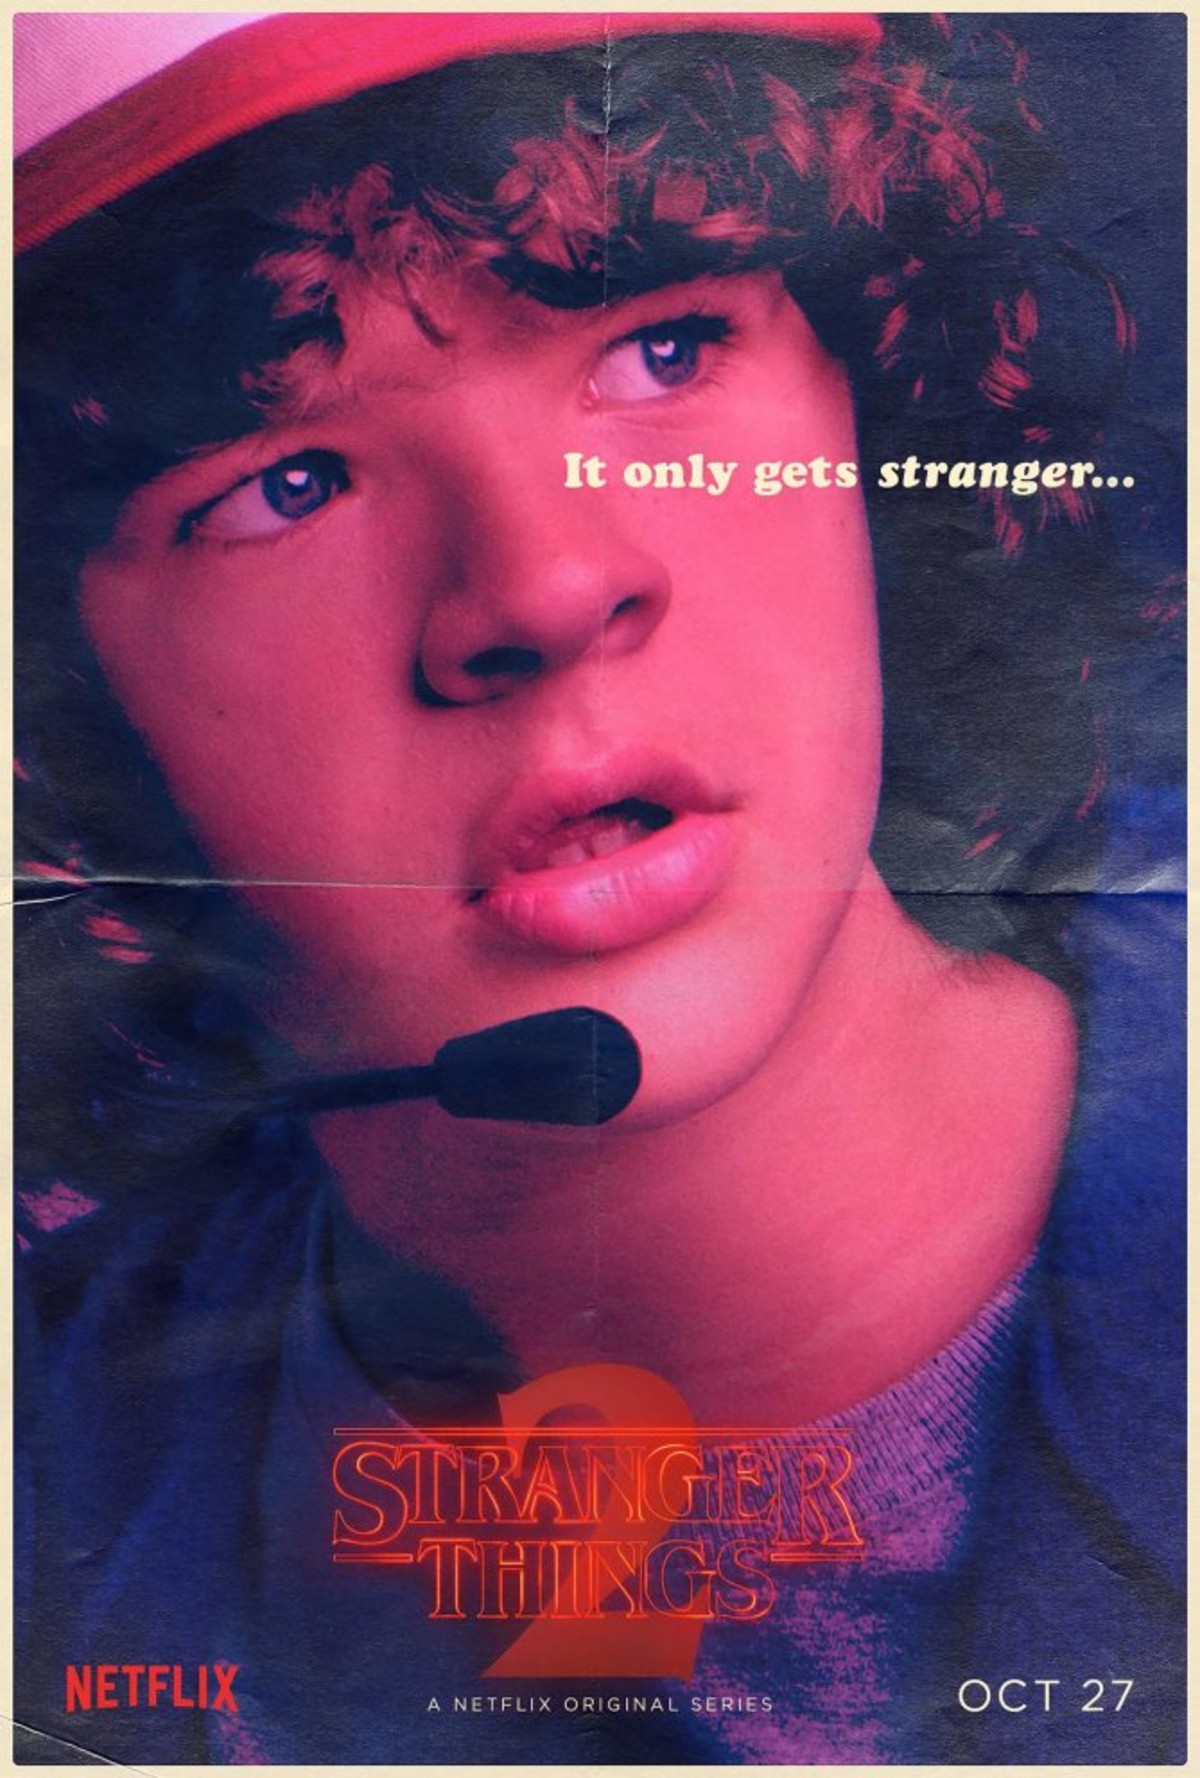 awesome-posters-for-stranger-things-season-2-focus-on-the-characters8.jpg